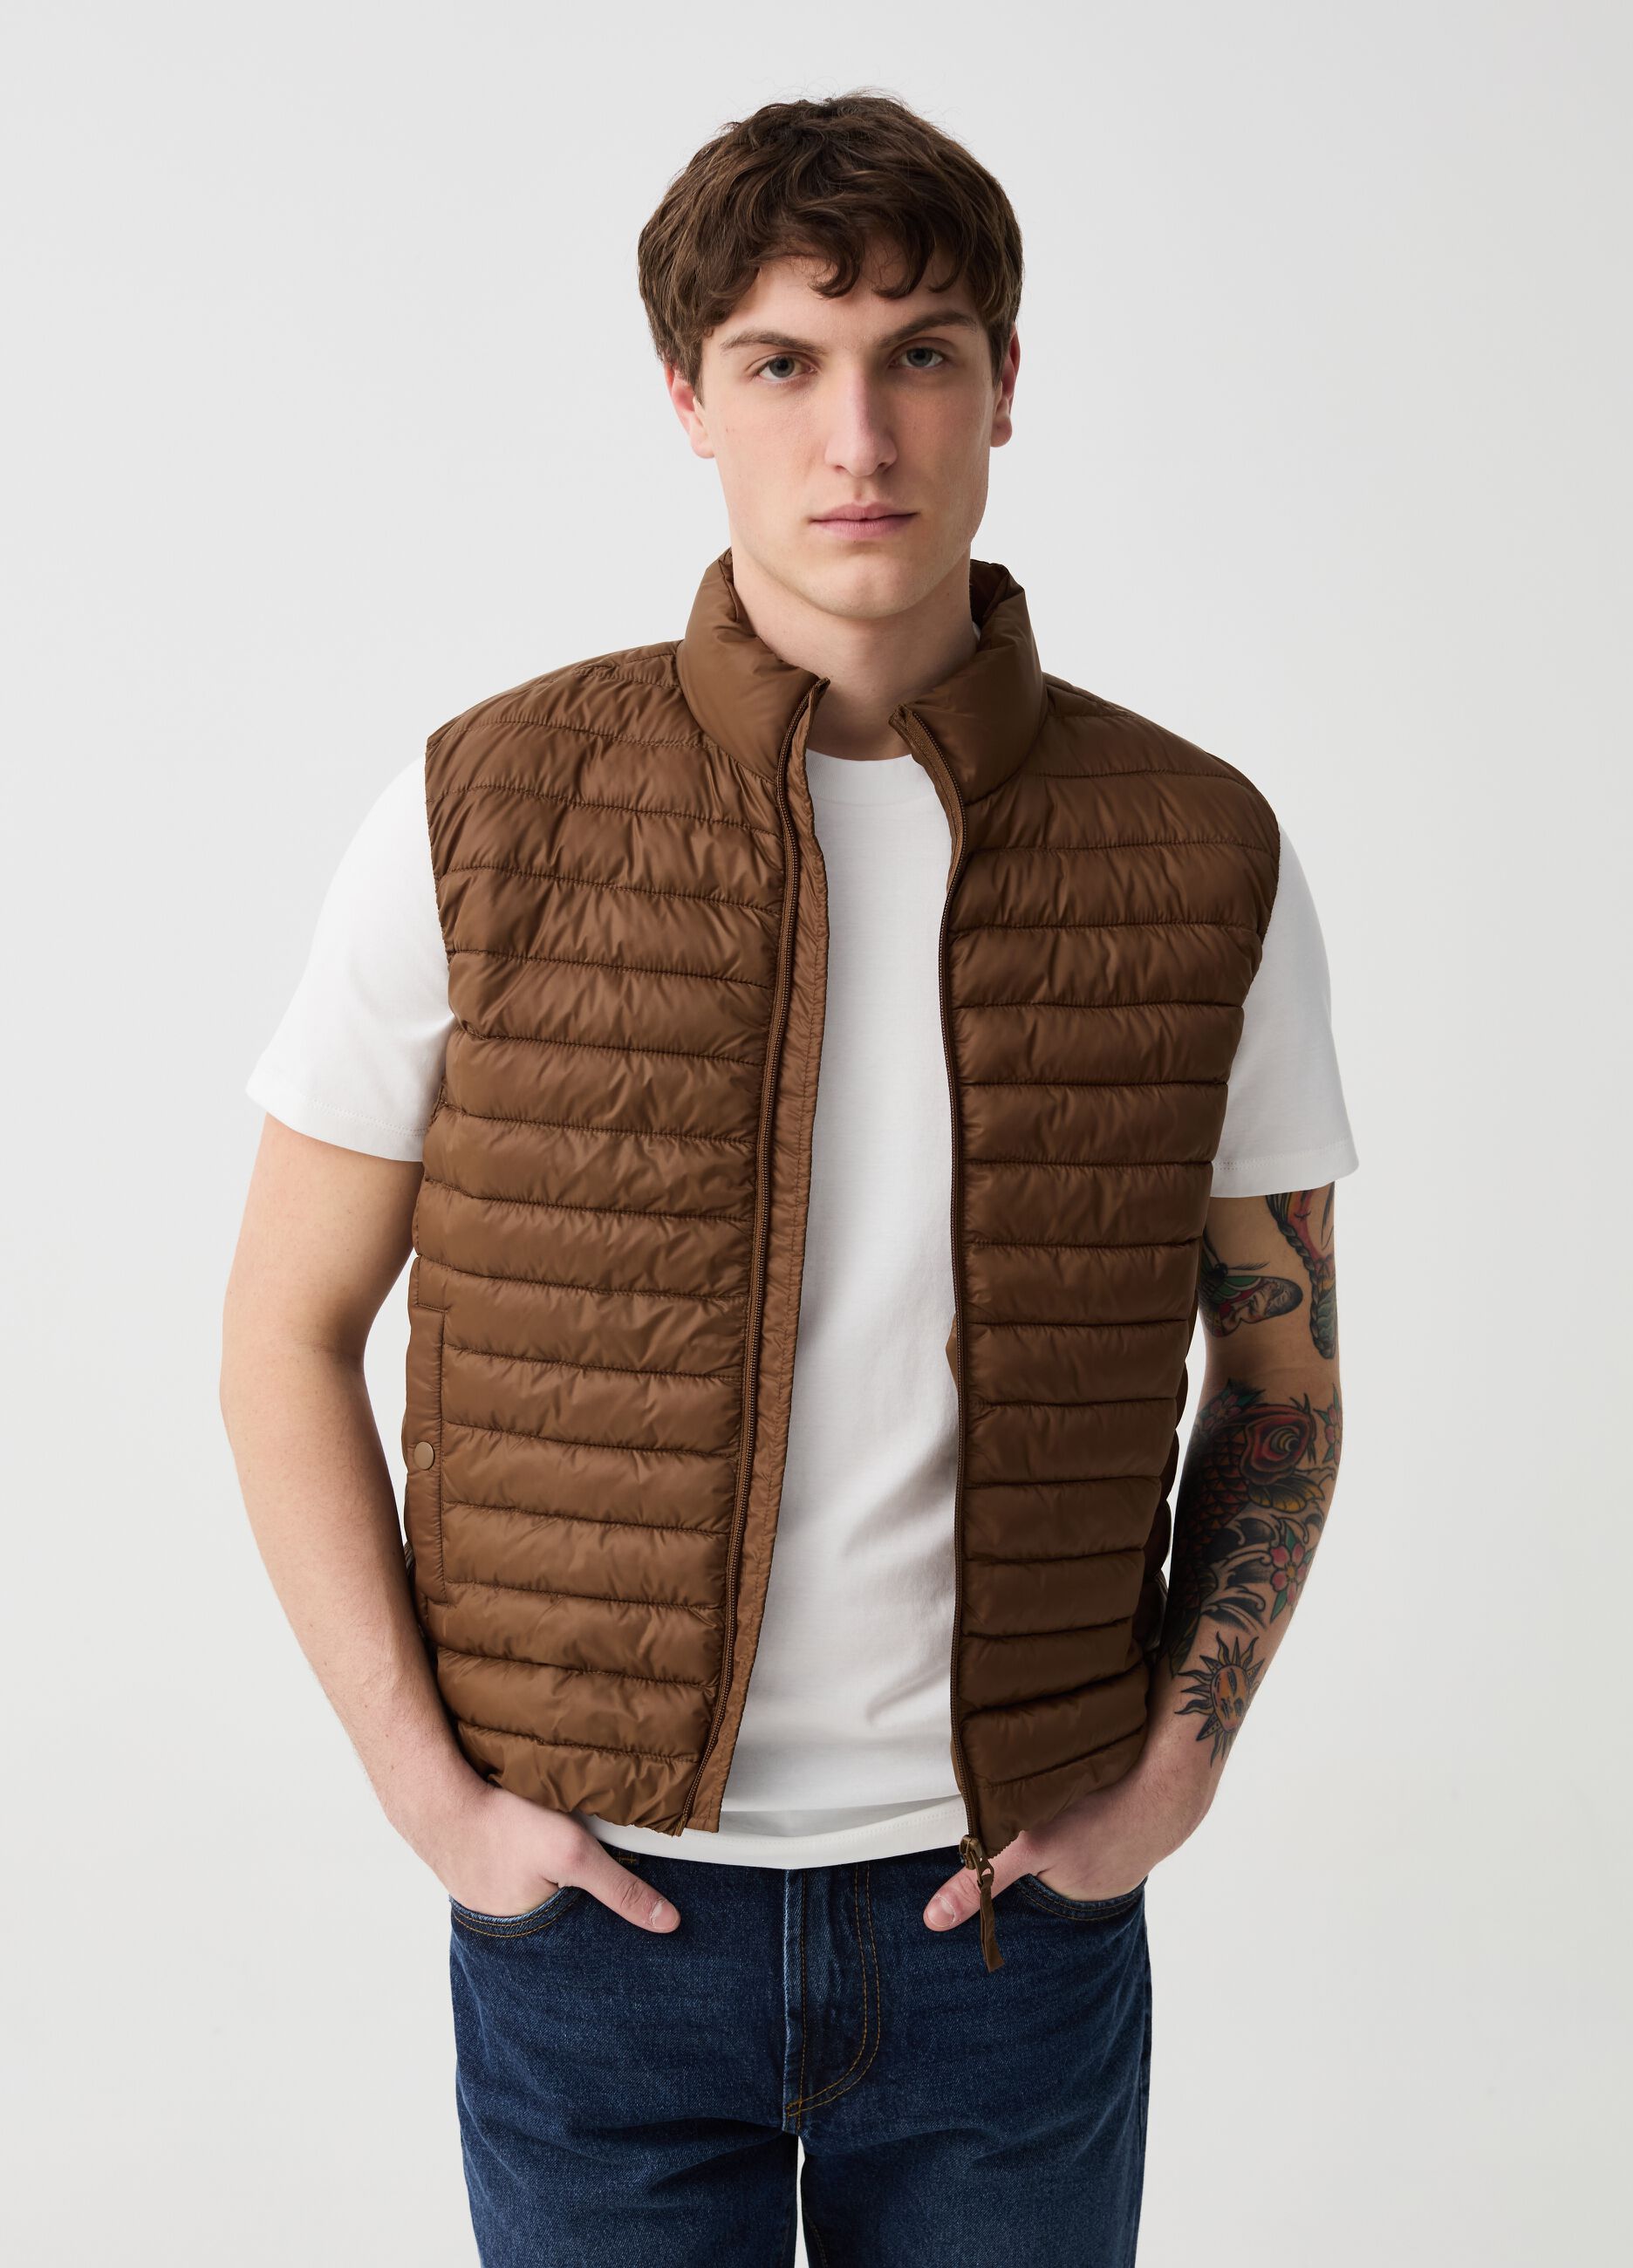 Ultralight quilted gilet with high neck